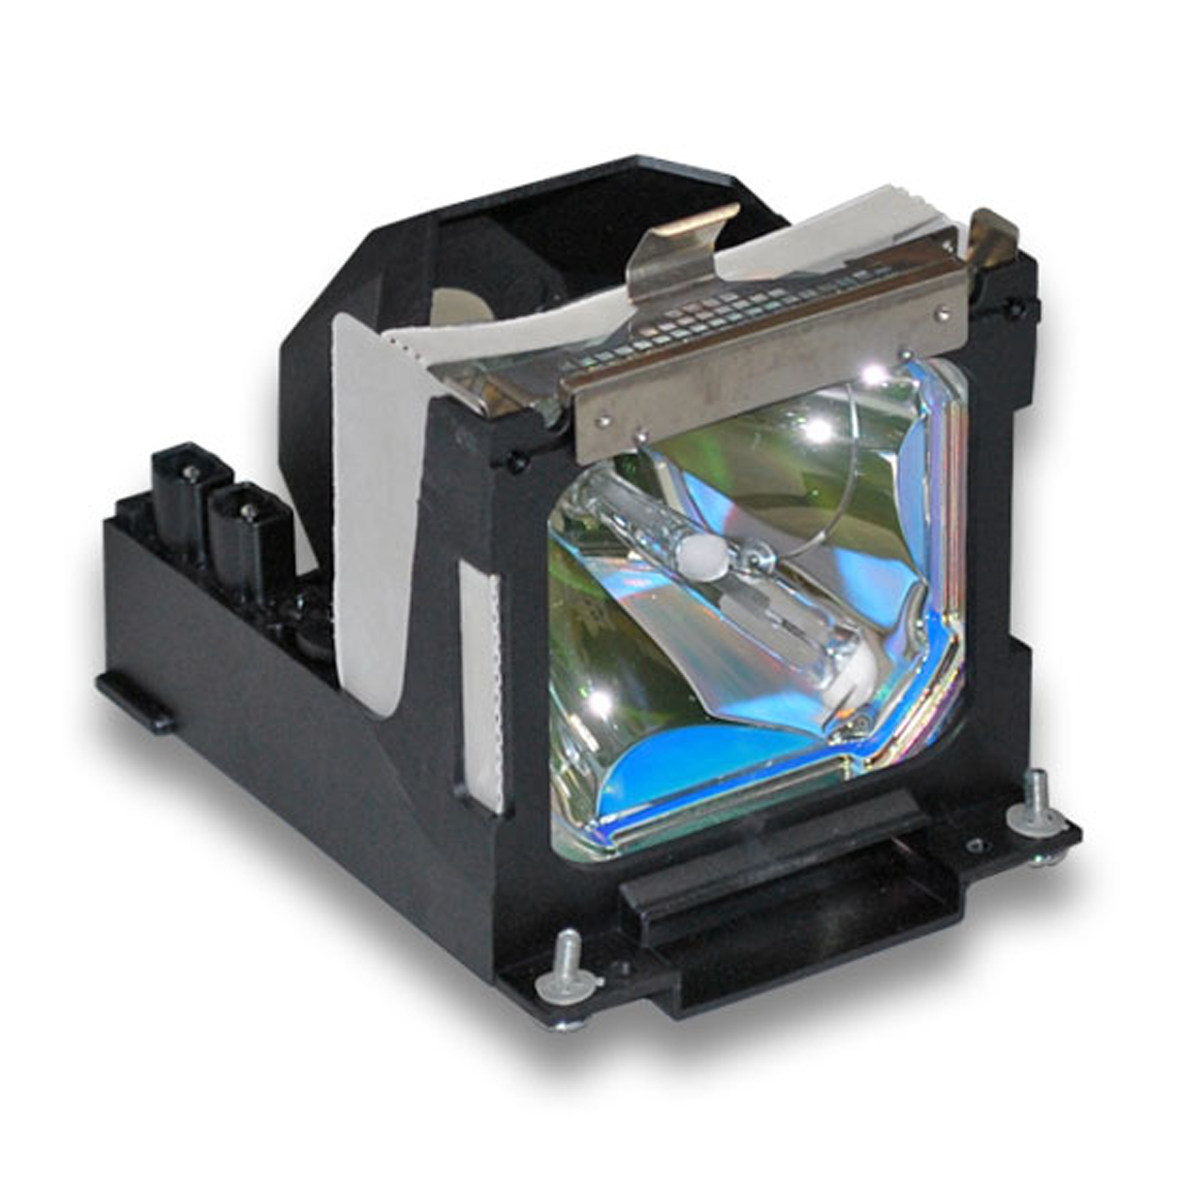 Replacement Projector lamp 03-000648-01P For CHRISTIE VIVID LX20